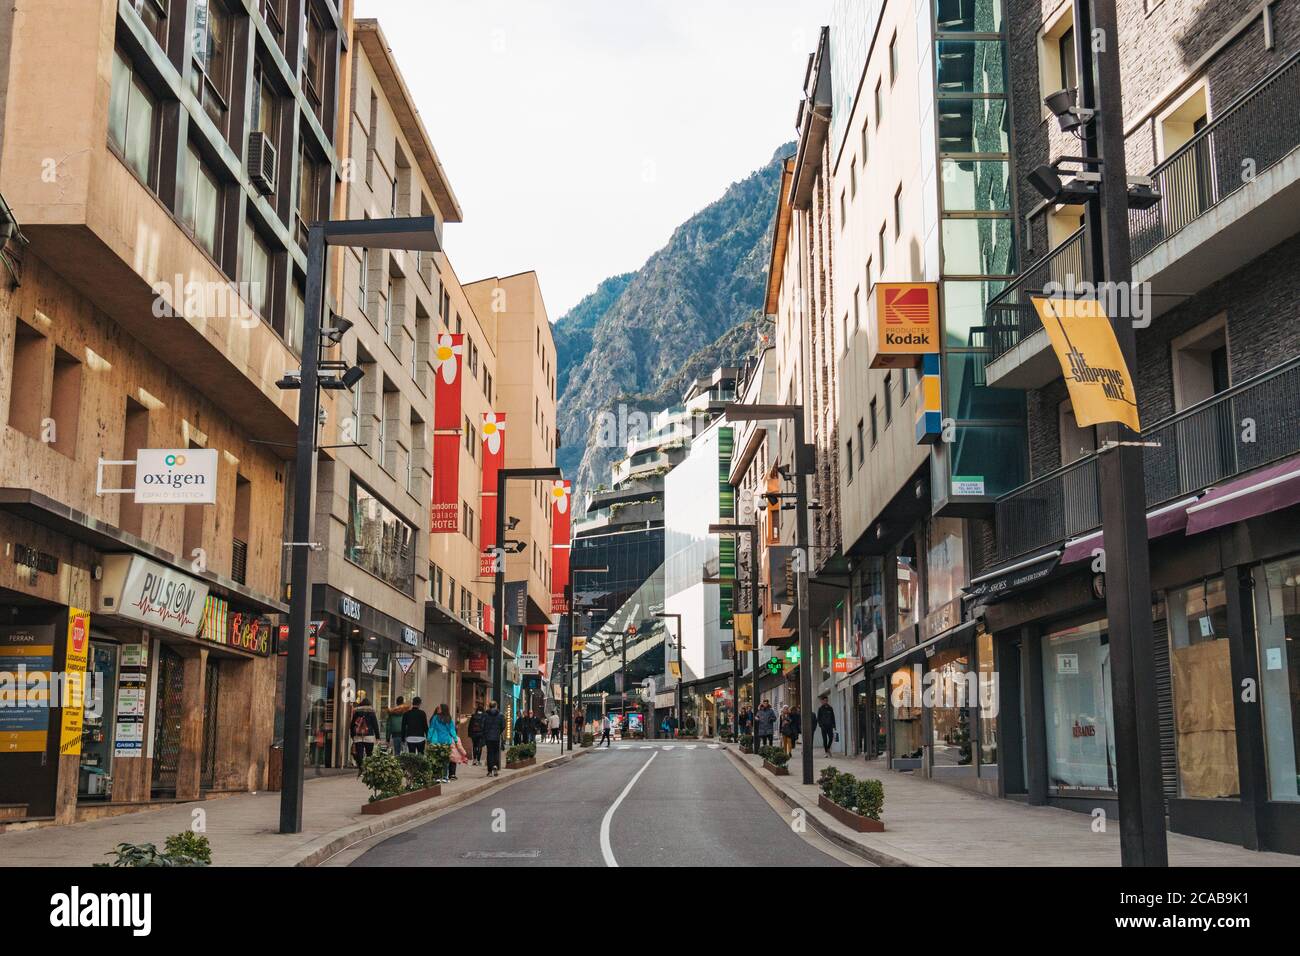 Retail district on Av. Meritxell in Andorra la Vella, capital city of Andorra. A popular destination to pick up duty free goods in Europe Stock Photo